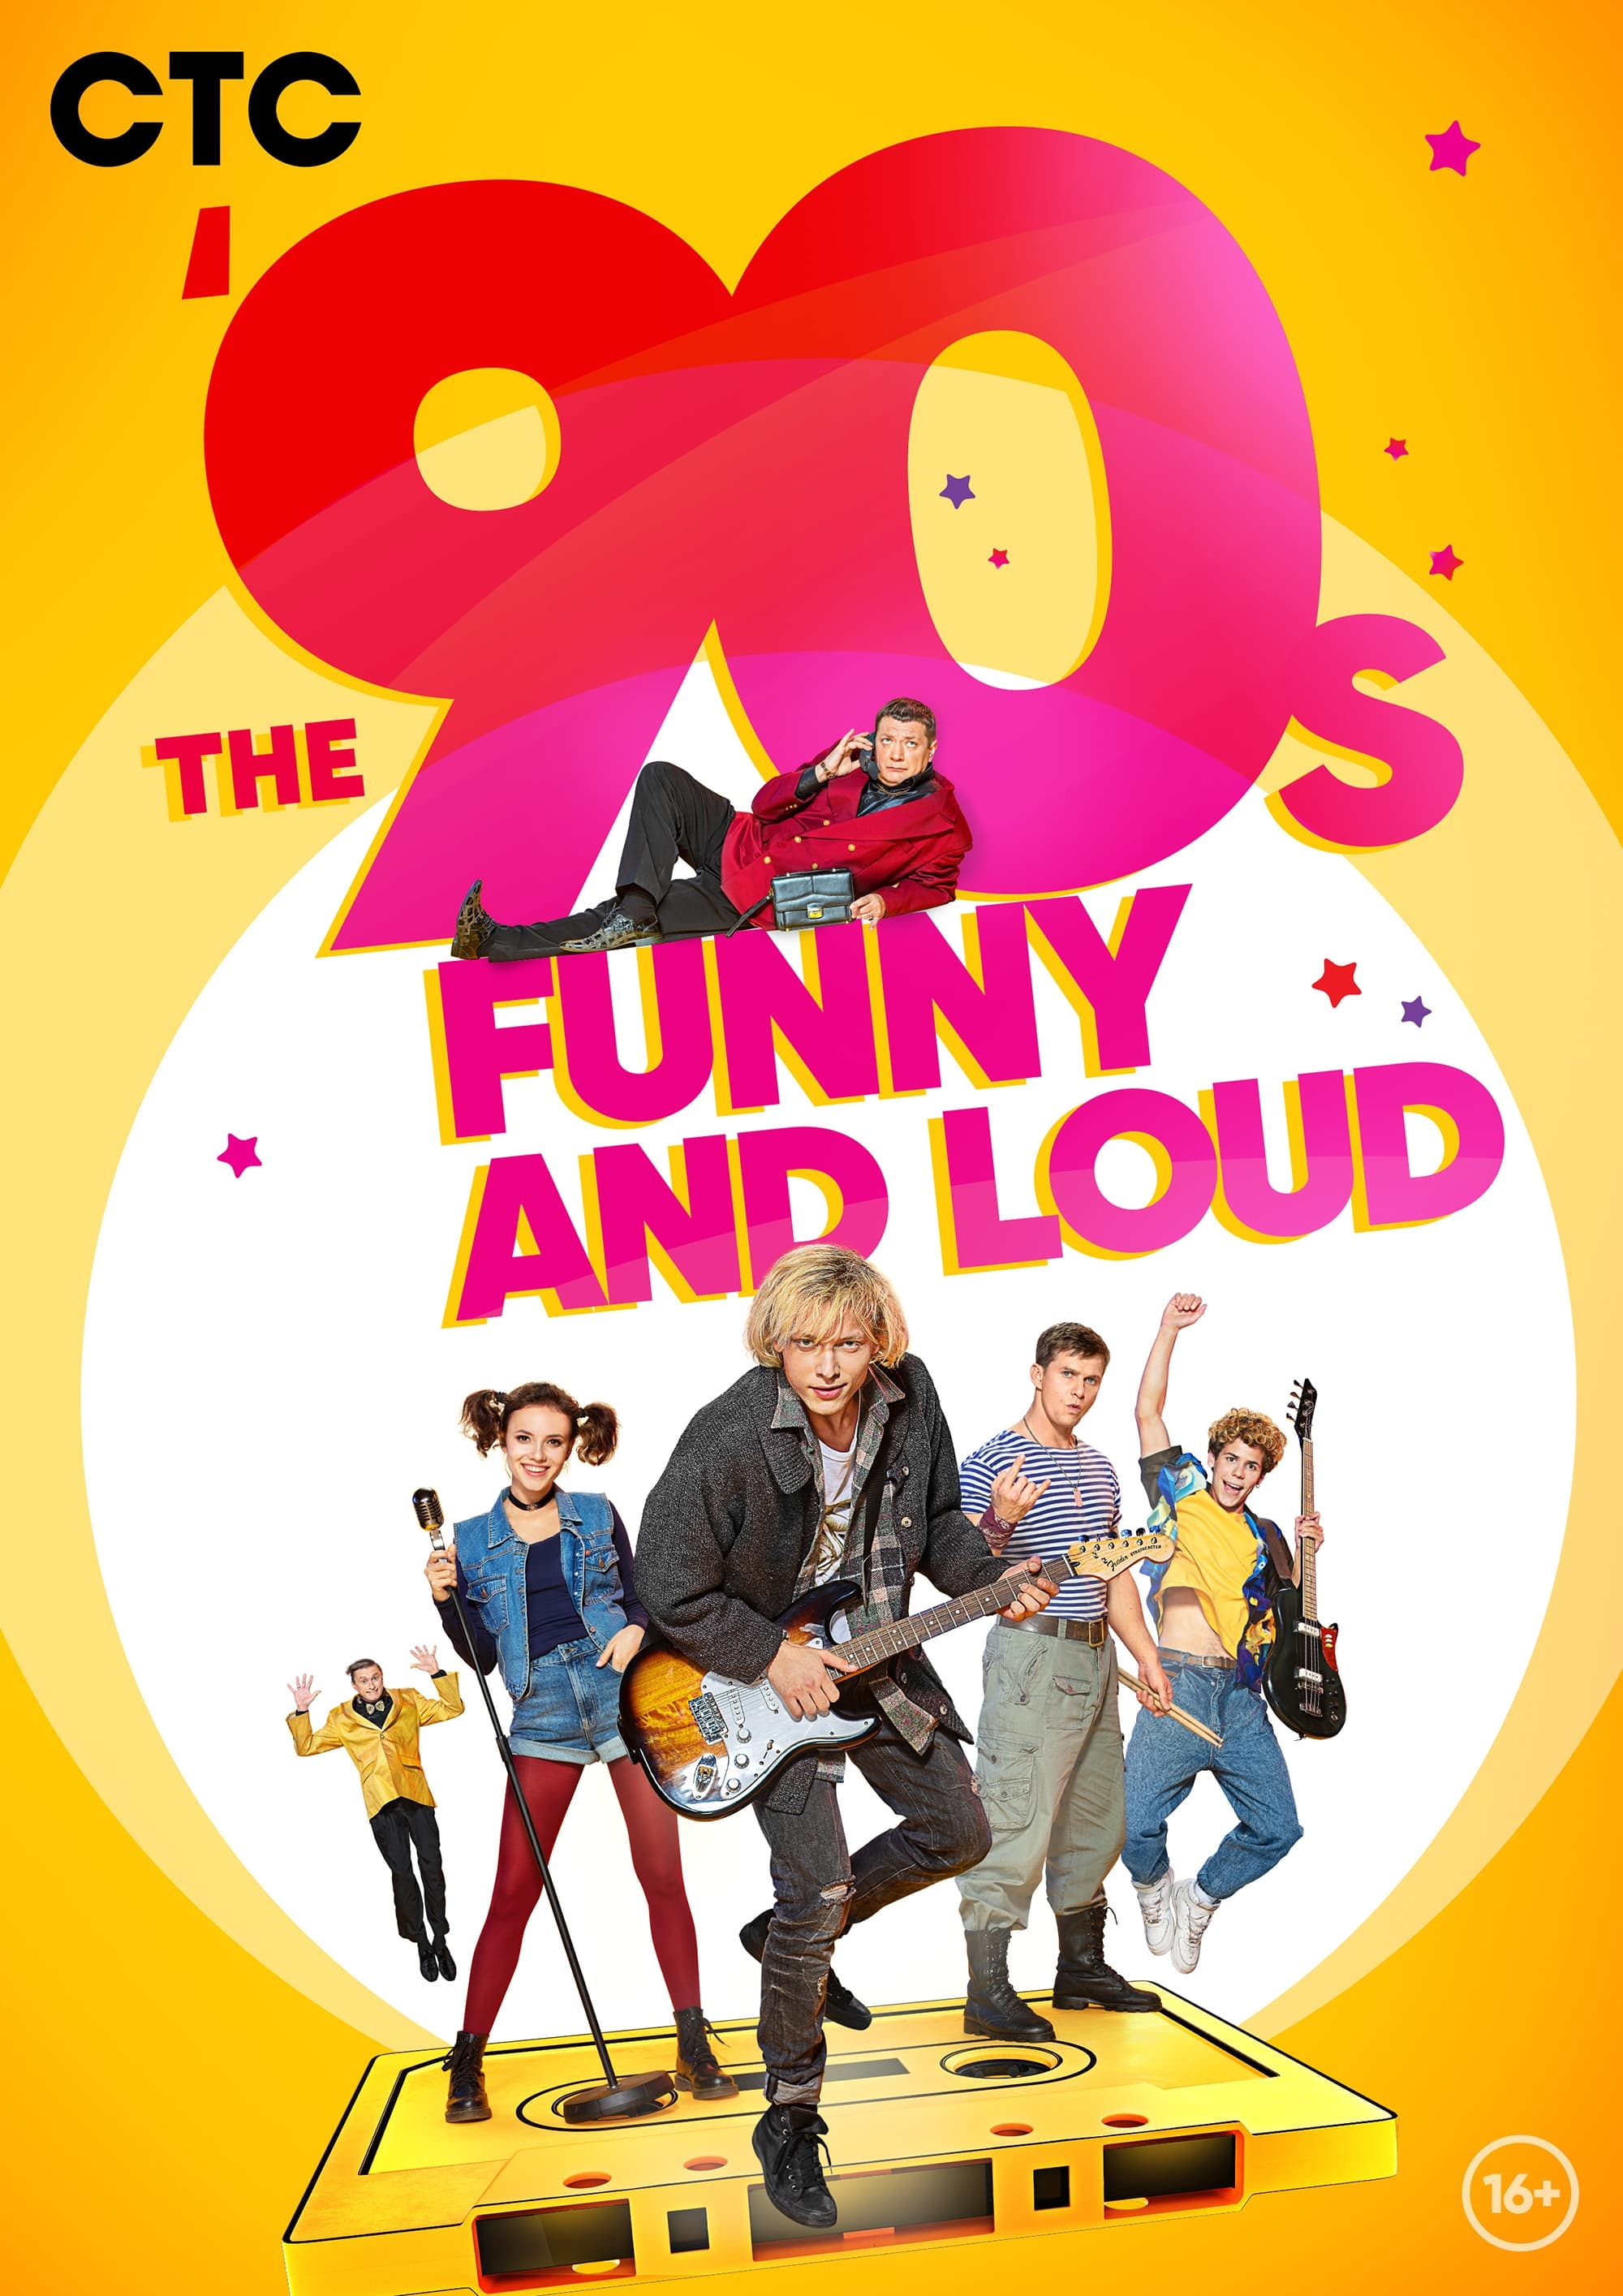 The '90-s. Funny and Loud (2019)